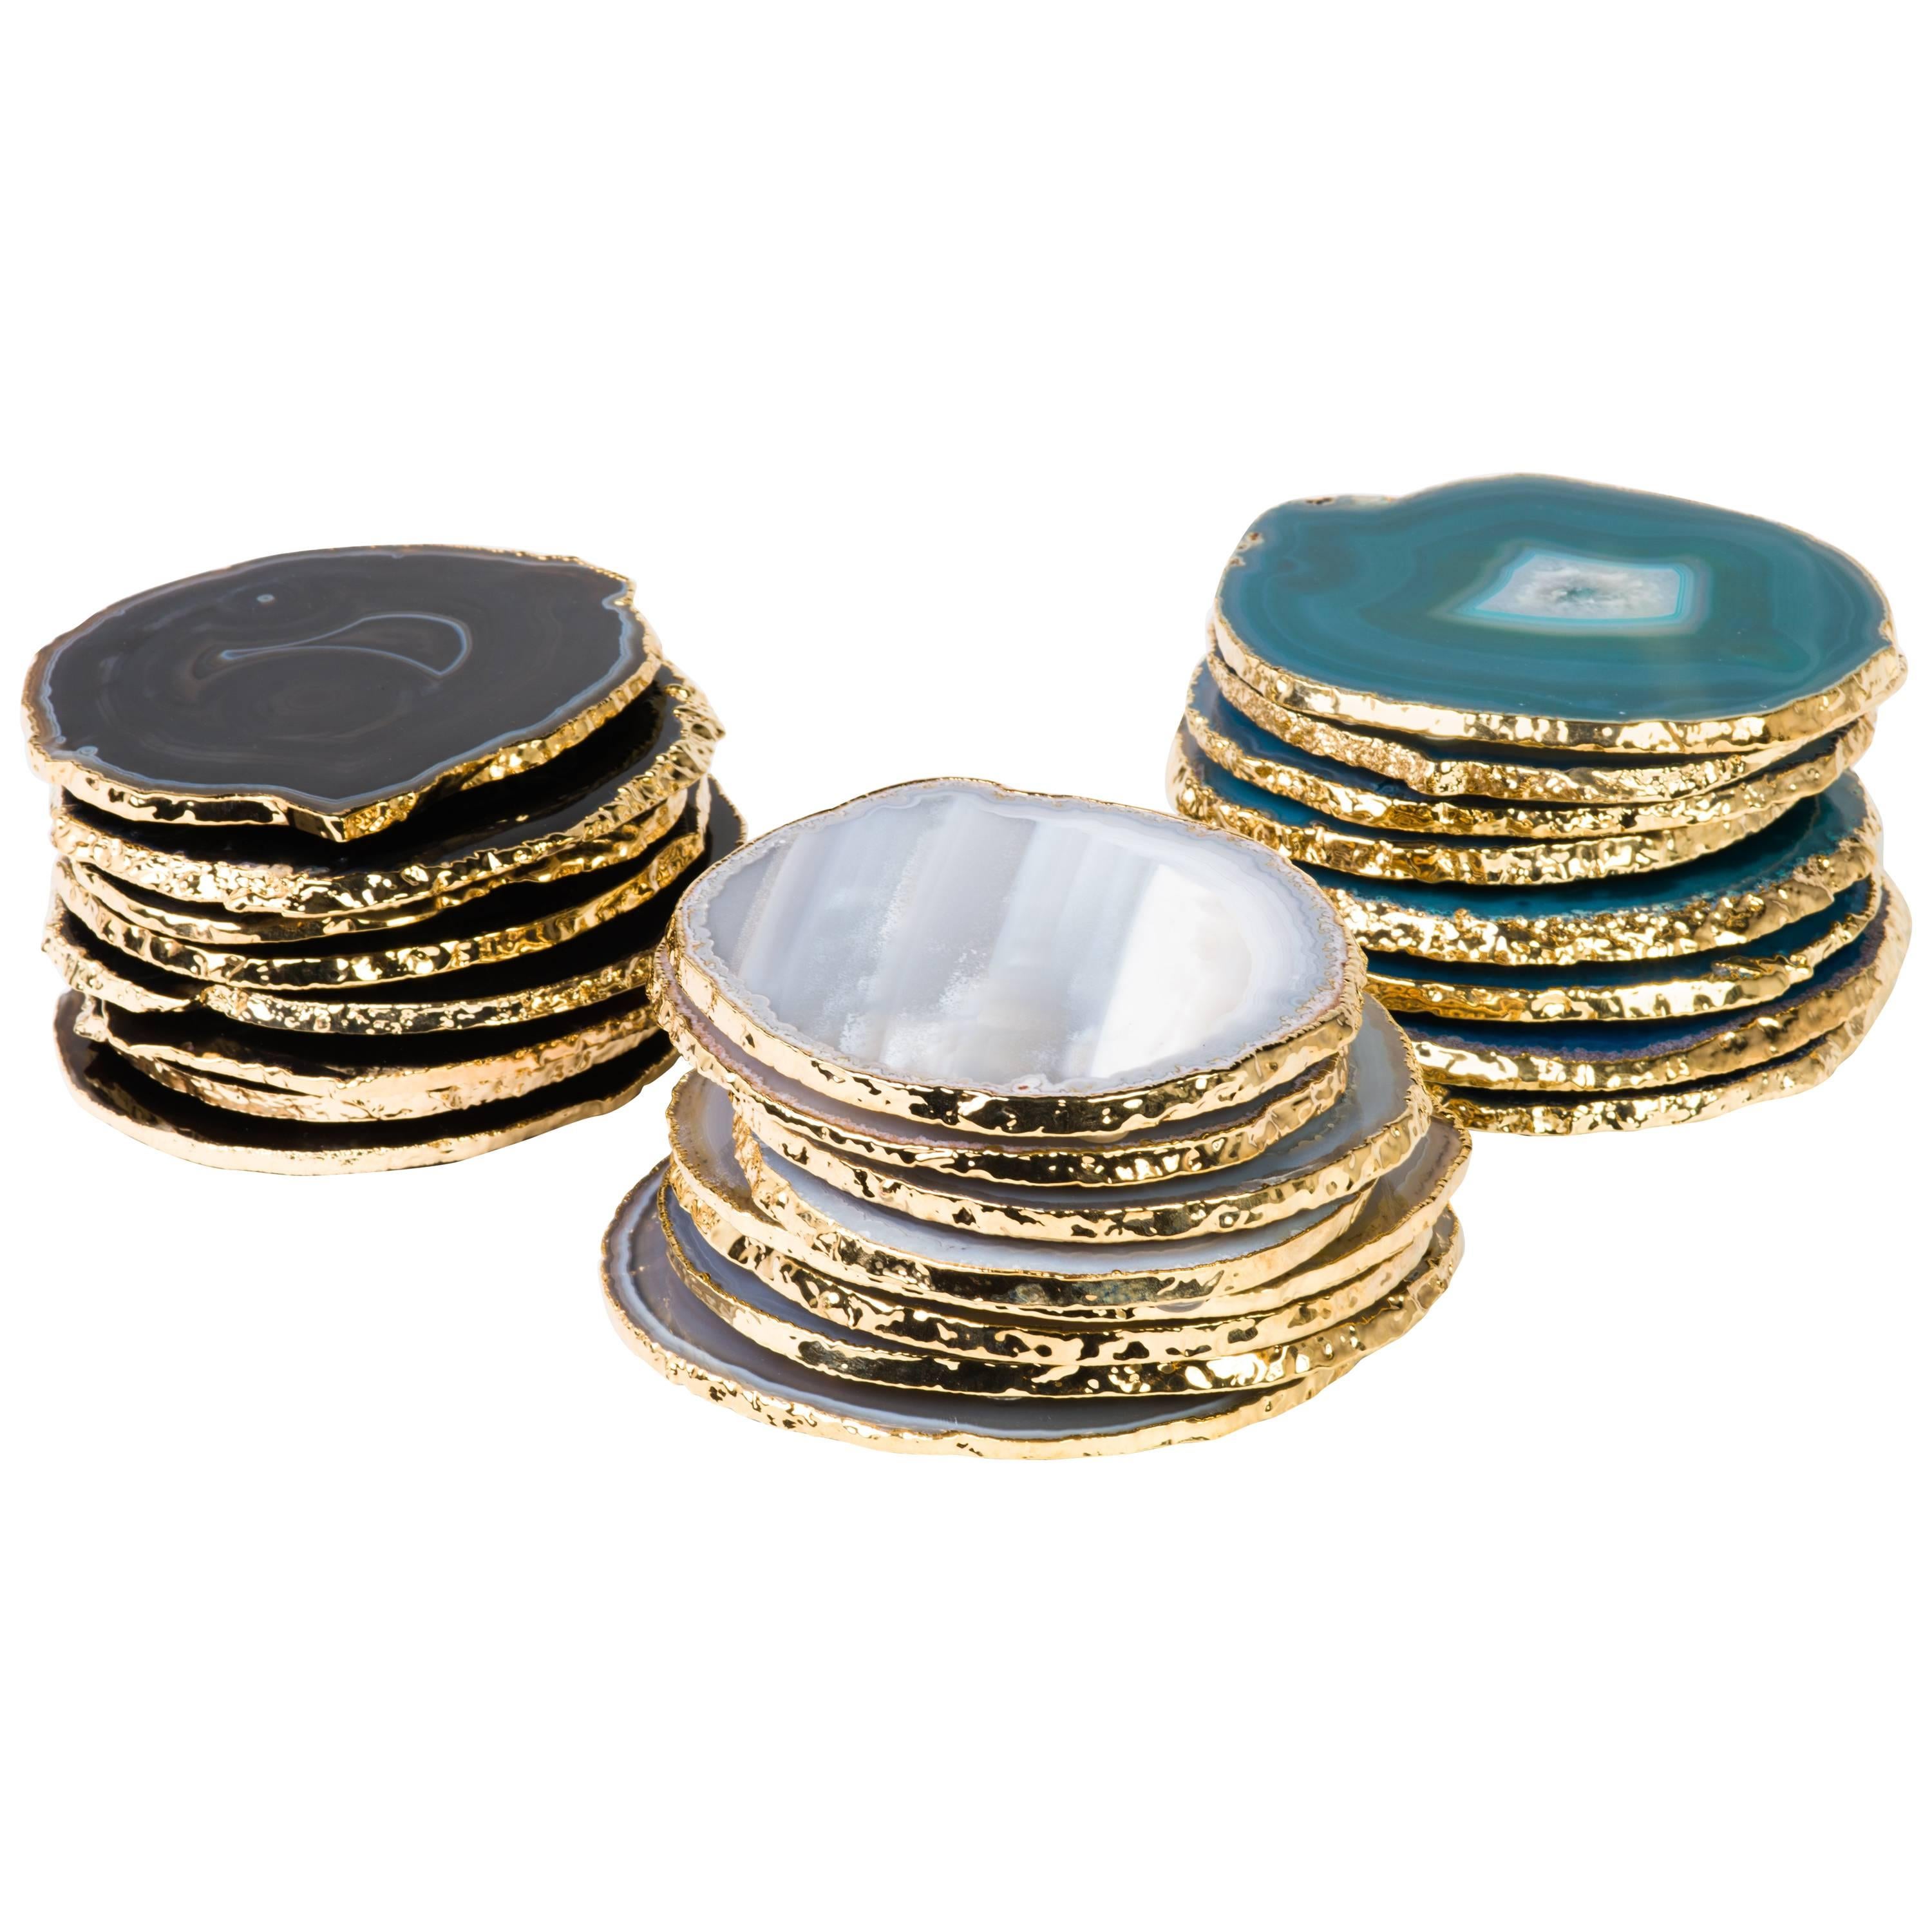 Contemporary Set of Eight Semi-Precious Gemstone Coasters Grey Agate Wrapped in 24-Karat Gold